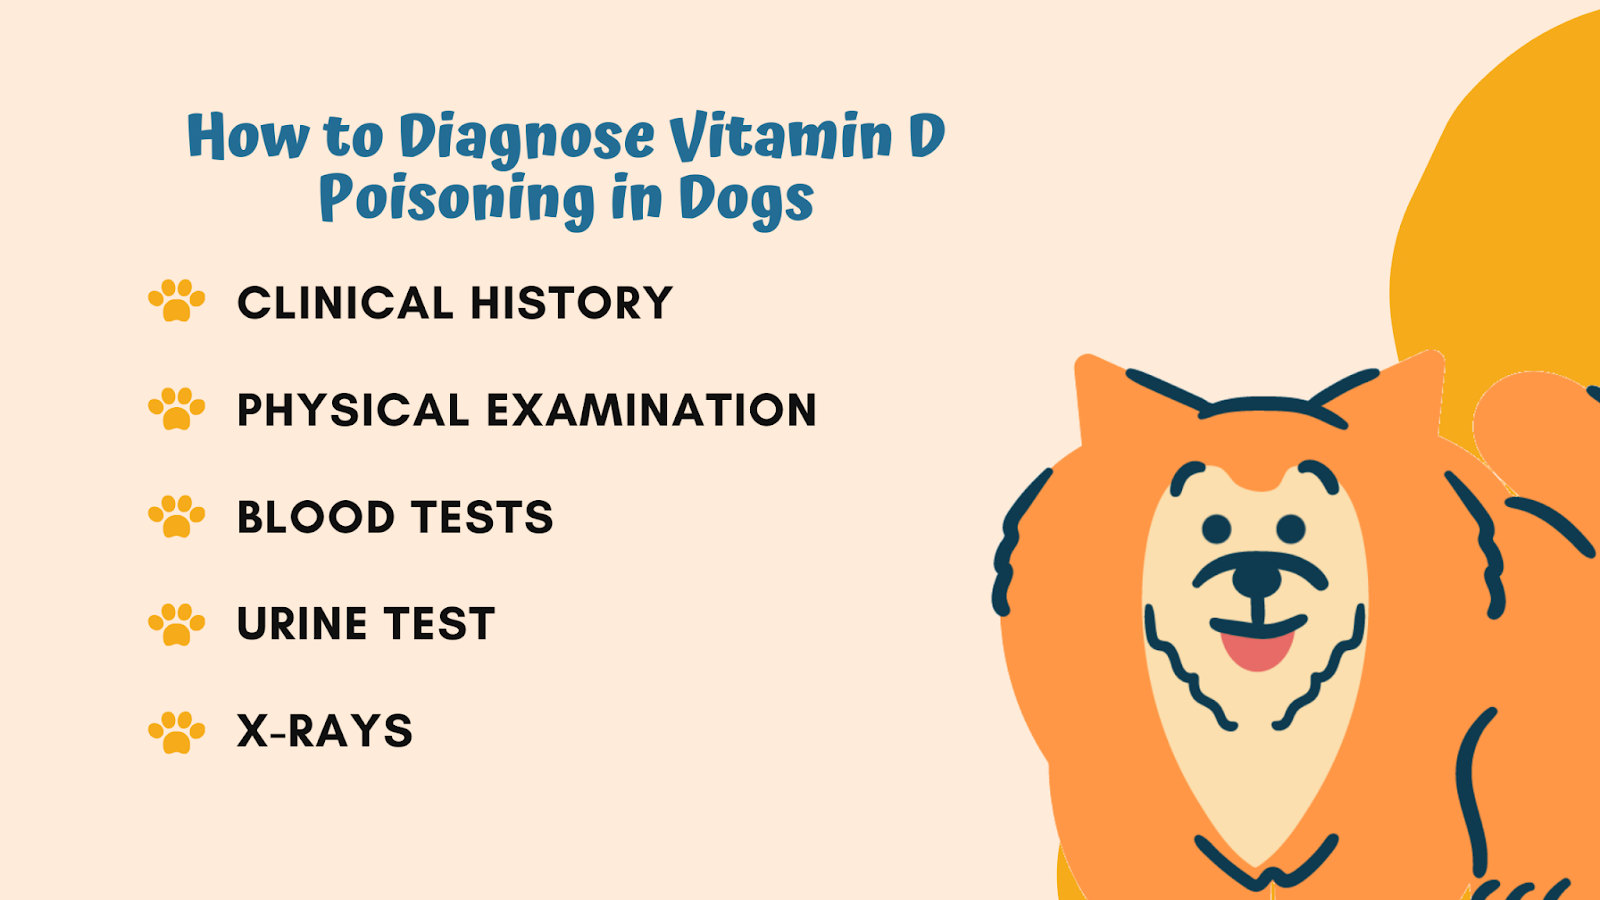 How to diagnose vitamin D poisoning in dogs